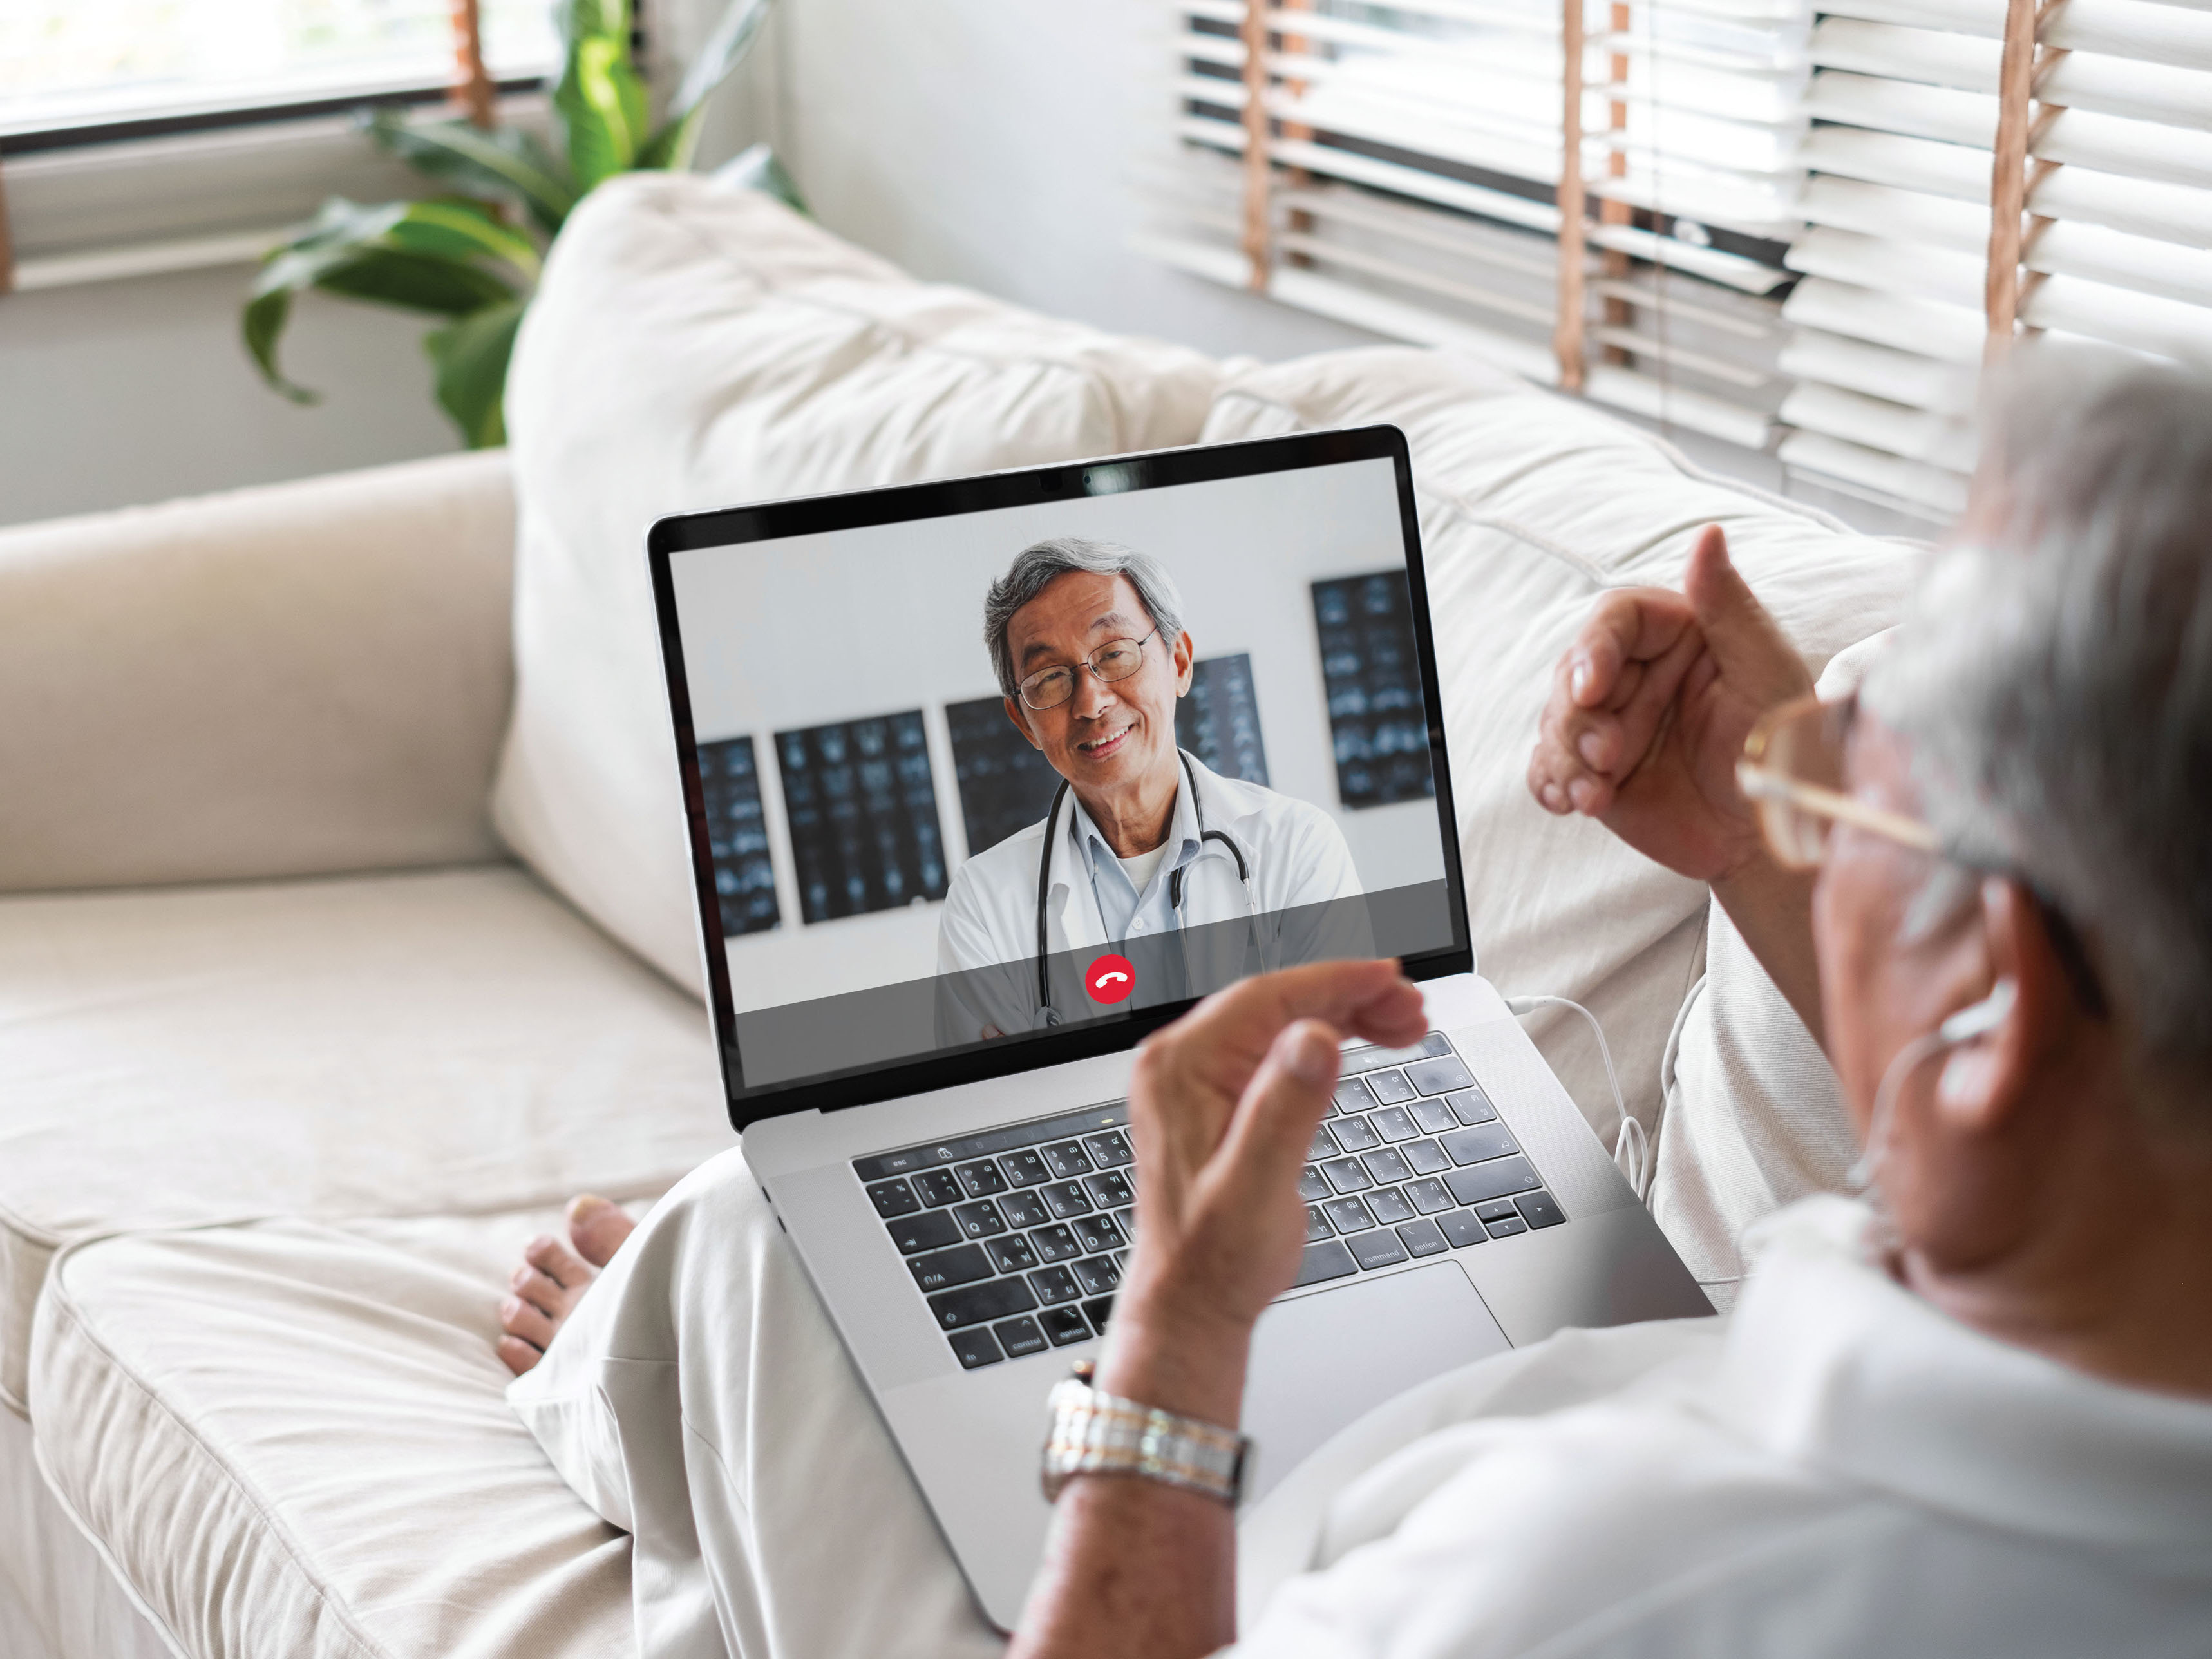 Lawmakers Push for Permanent Telehealth Services